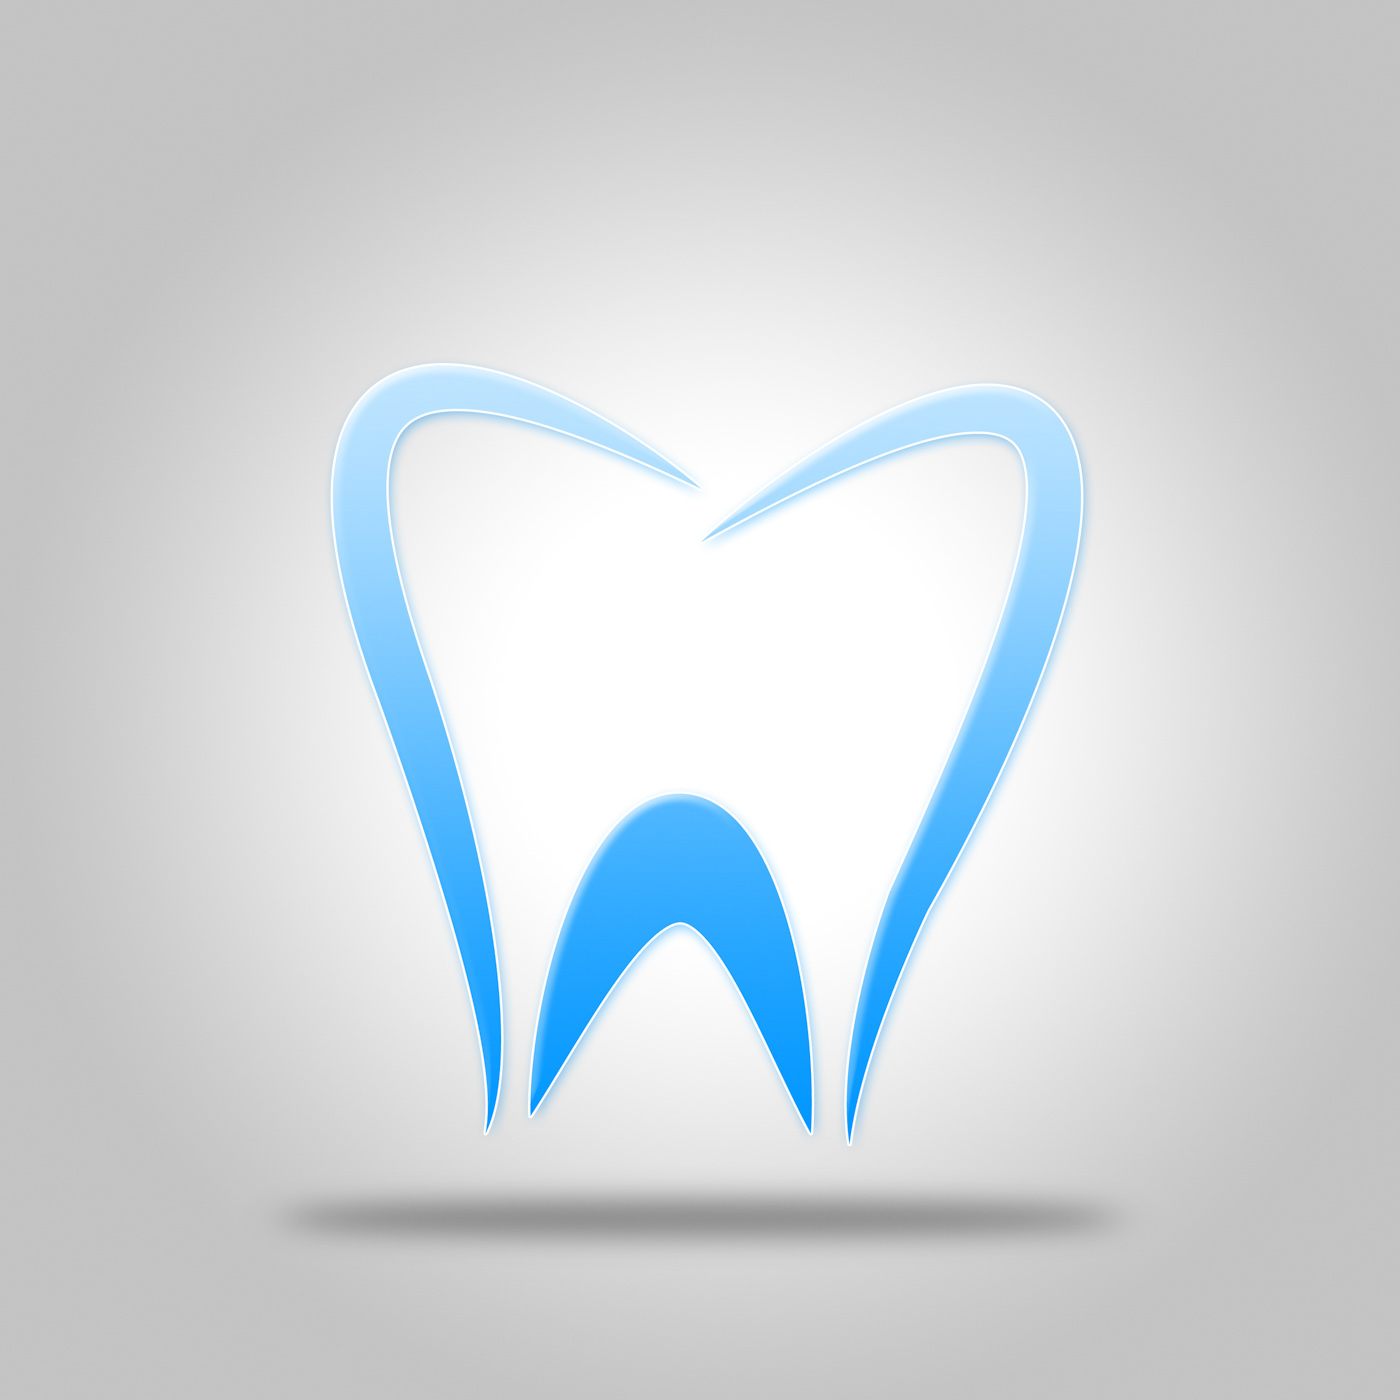 Tooth icon shows dentist icons and dentistry photo